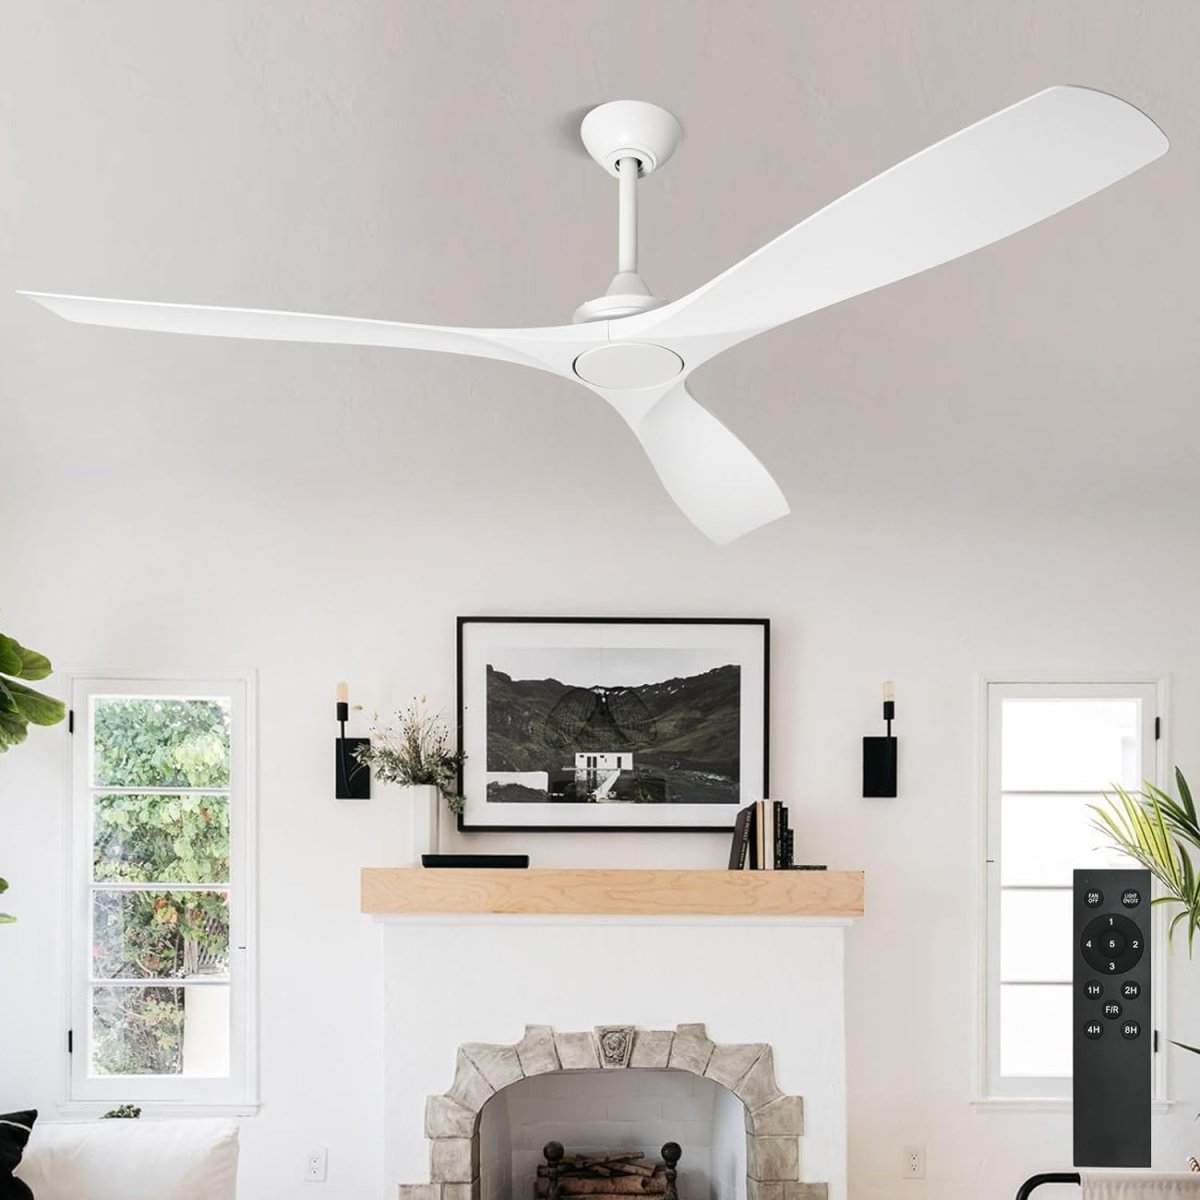 Depuley 60" White Flush Mount Remote Ceiling Fan No Light, Low Profile Modern Ceiling Fans Without Light, Noiseless Reversible DC Motor for Patios/Living Room/Study/Gazebo, Timing - WS-FPZ43-18B-WH 1 | DEPULEY